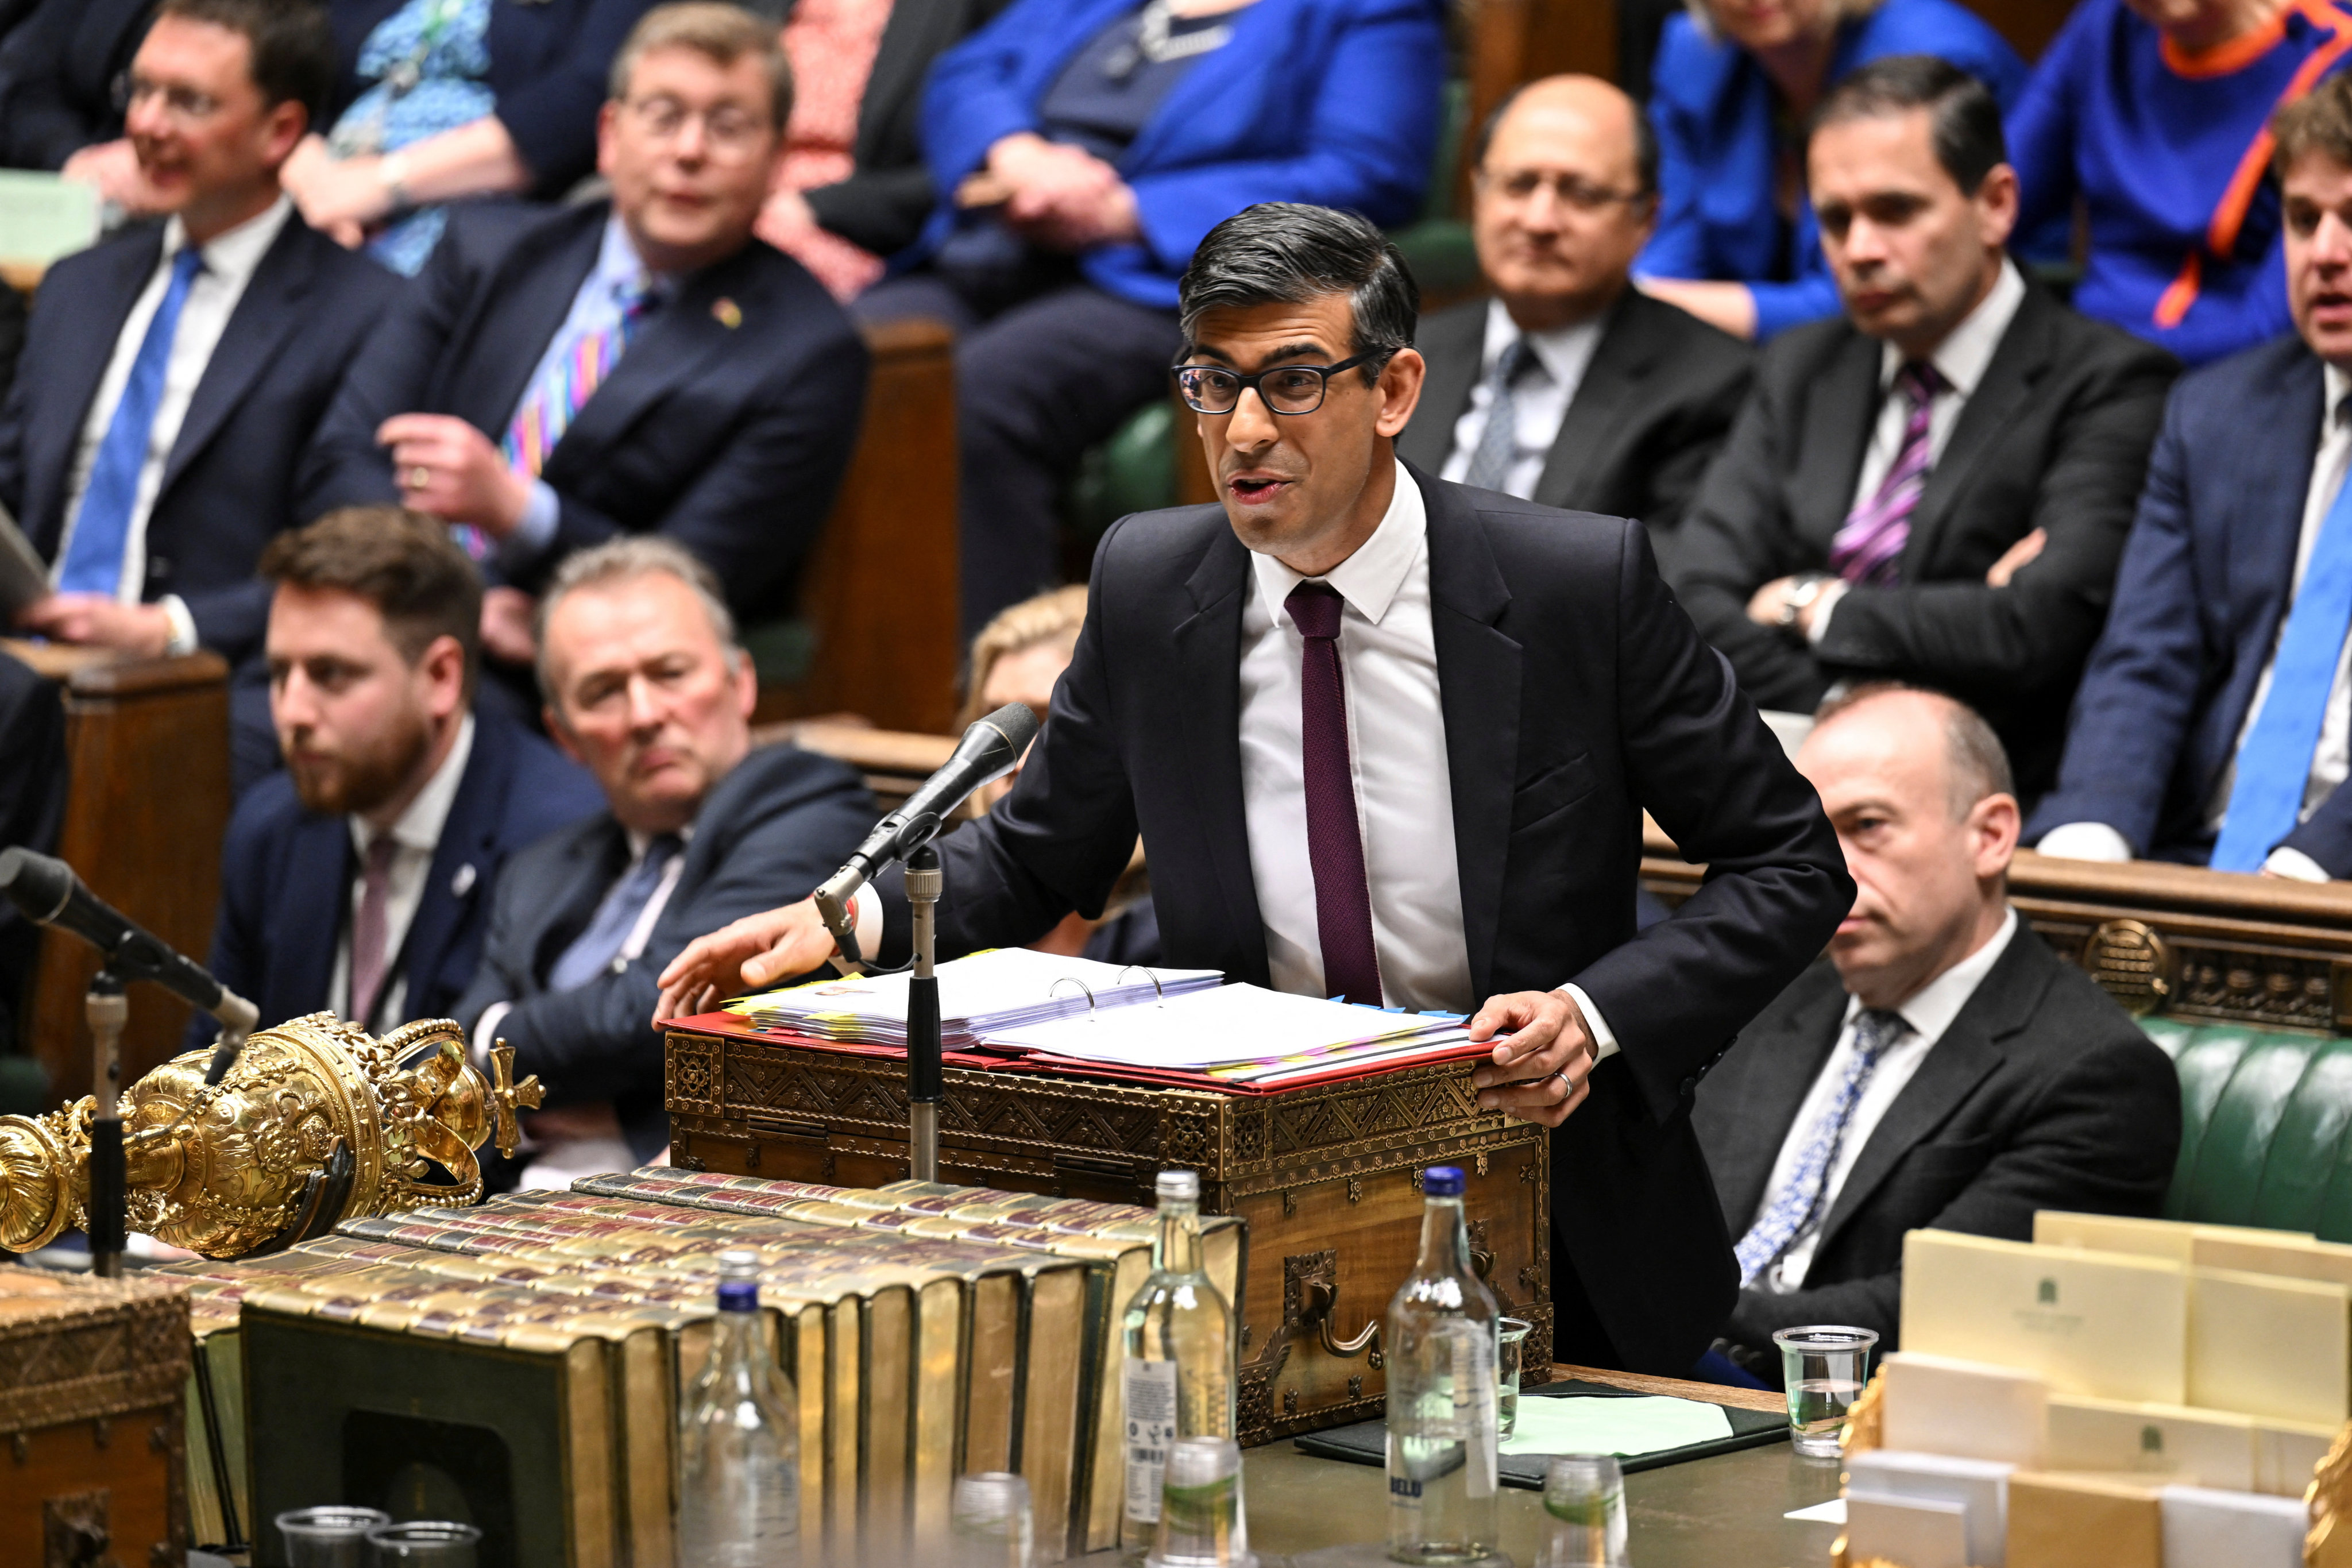 British Prime Minister Rishi Sunak at the House of Commons in London, Britain on Wednesday. Photo: UK Parliament / Jessica Taylor / Handout via Reuters